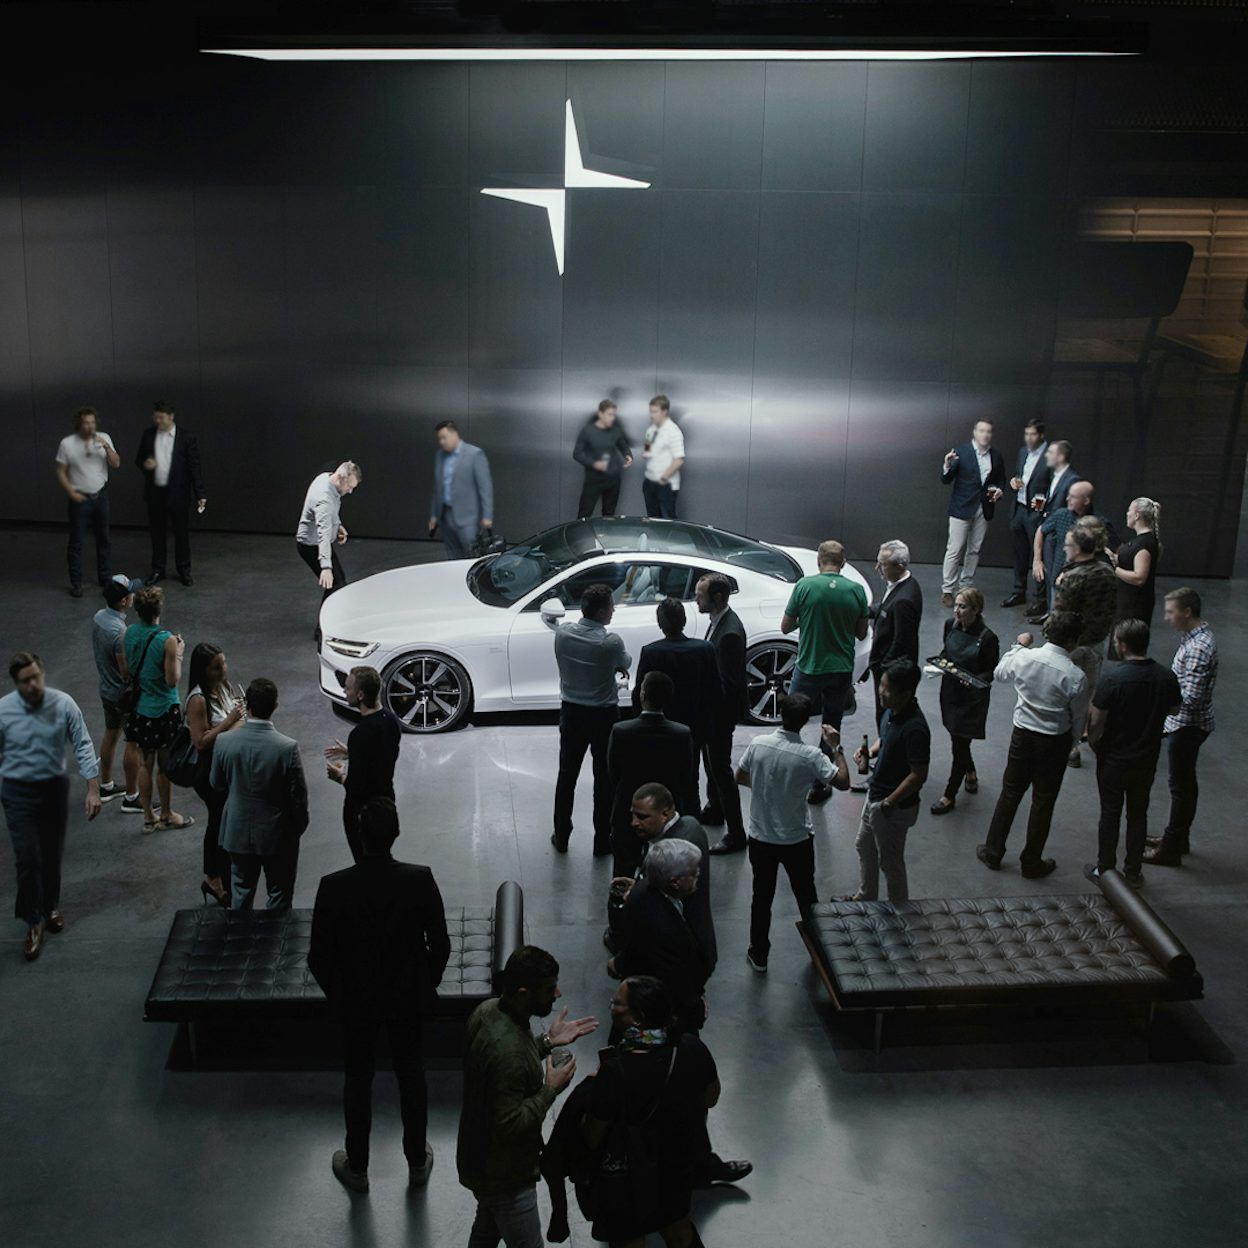 A crowd gathered around a white Polestar with the Polestar logo on a black wall in the background